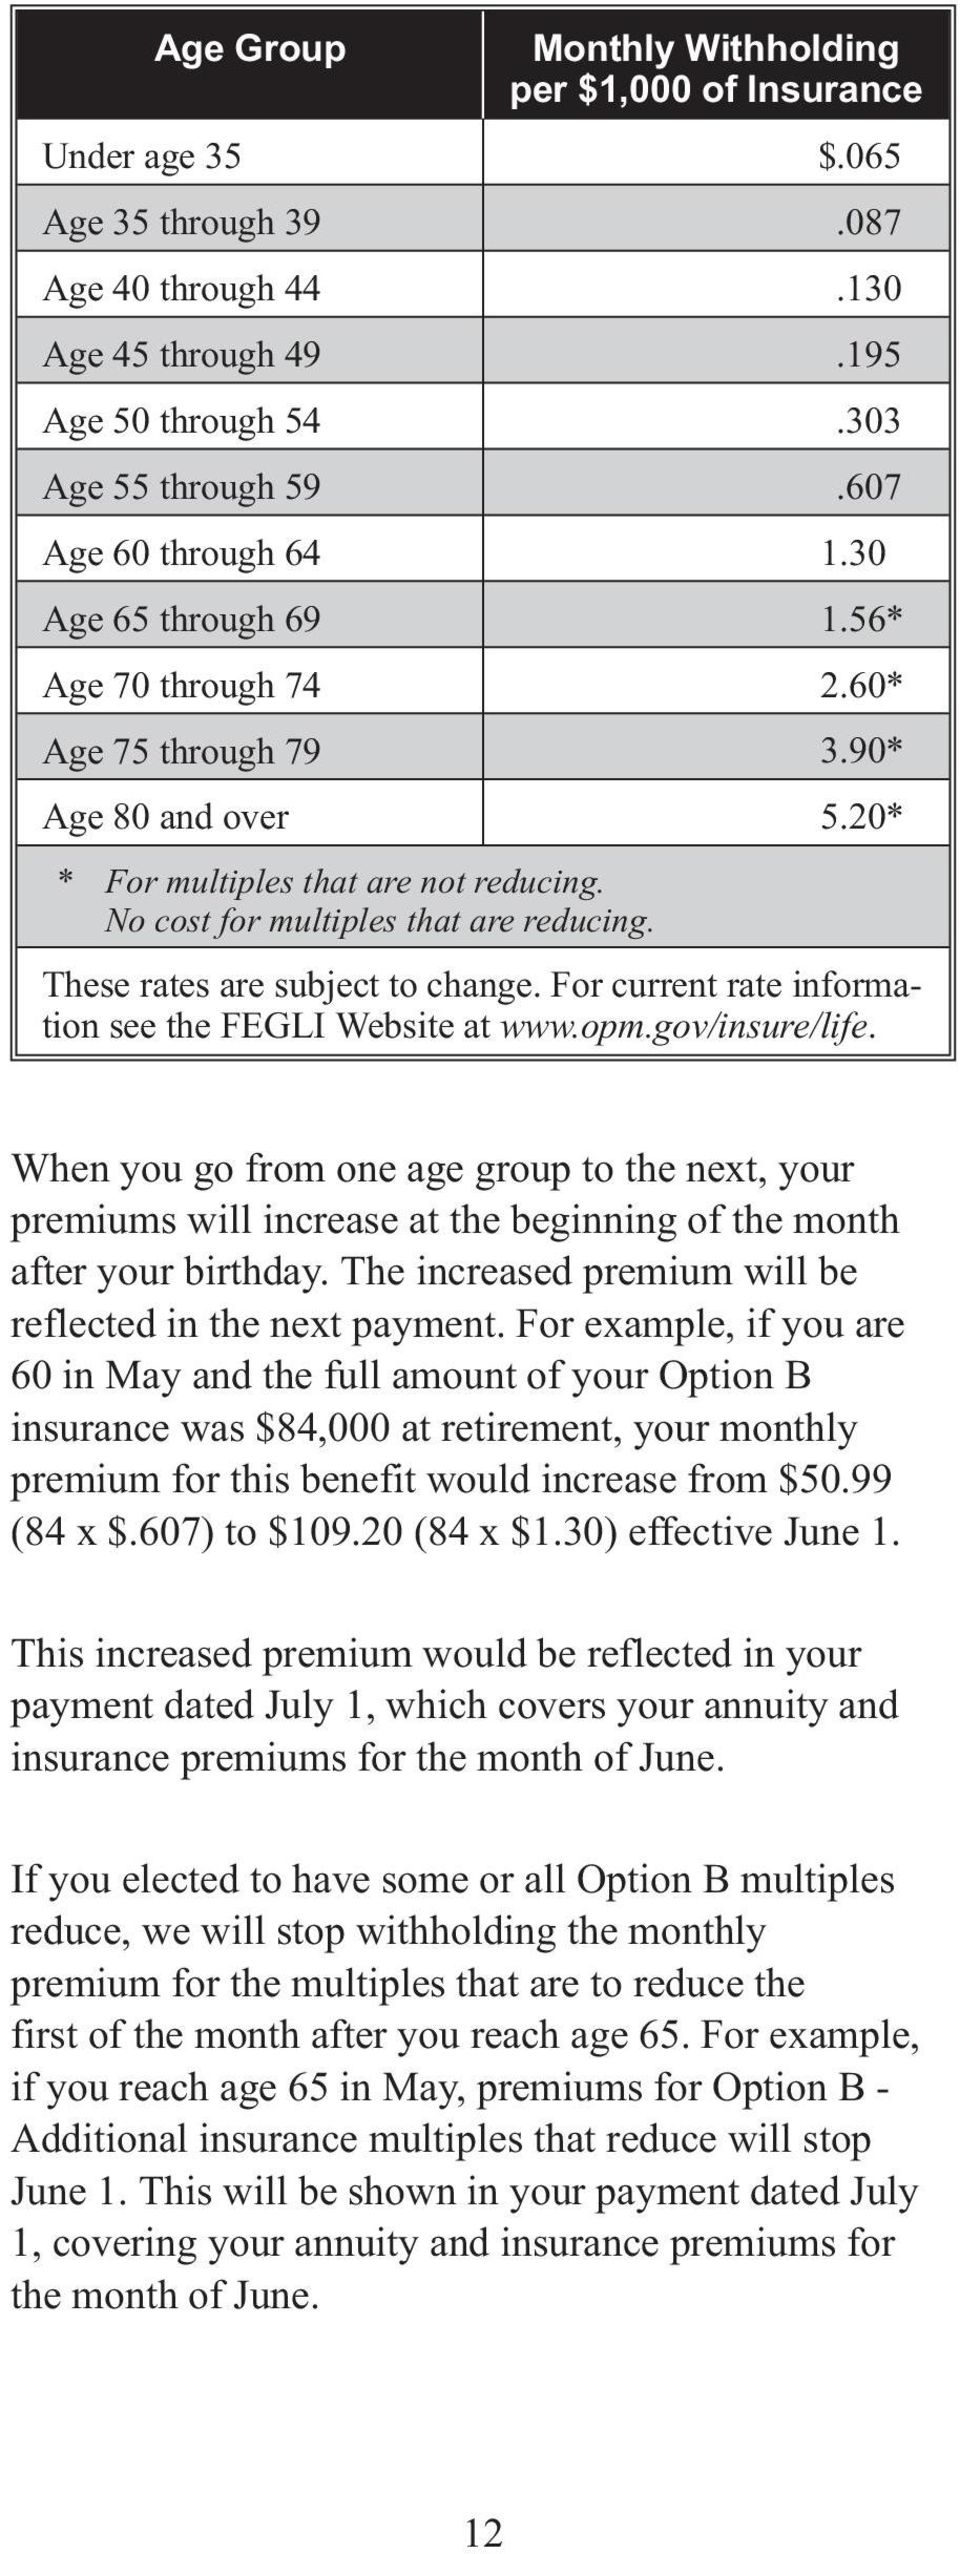 These rates are subject to change. For current rate information see the FEGLI Website at www.opm.gov/insure/life.